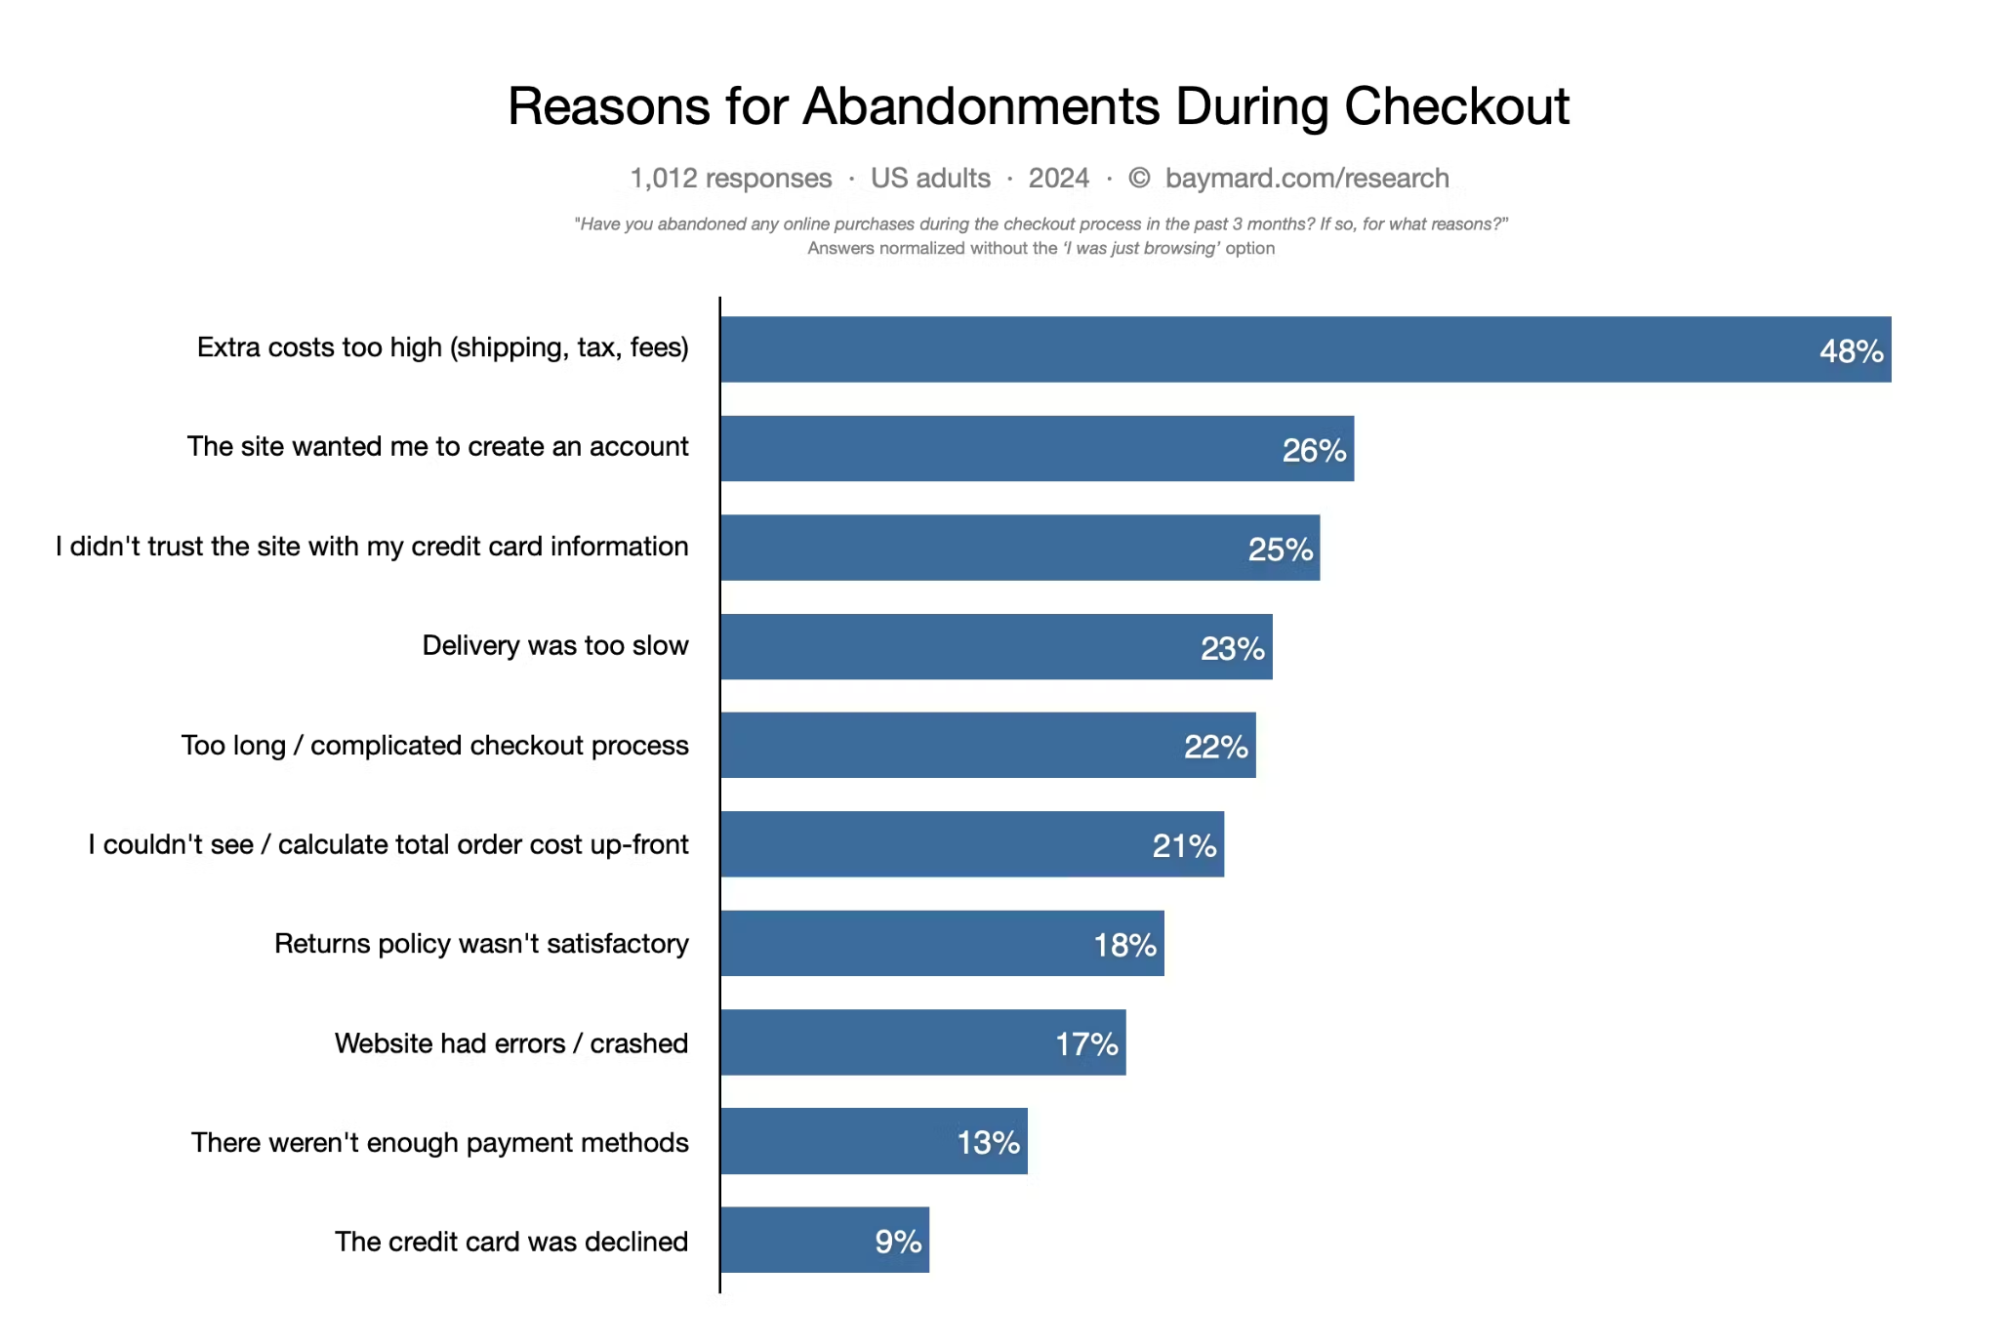 Bar chart shows reasons for cart abandonment during checkout, top reason being extra cost.